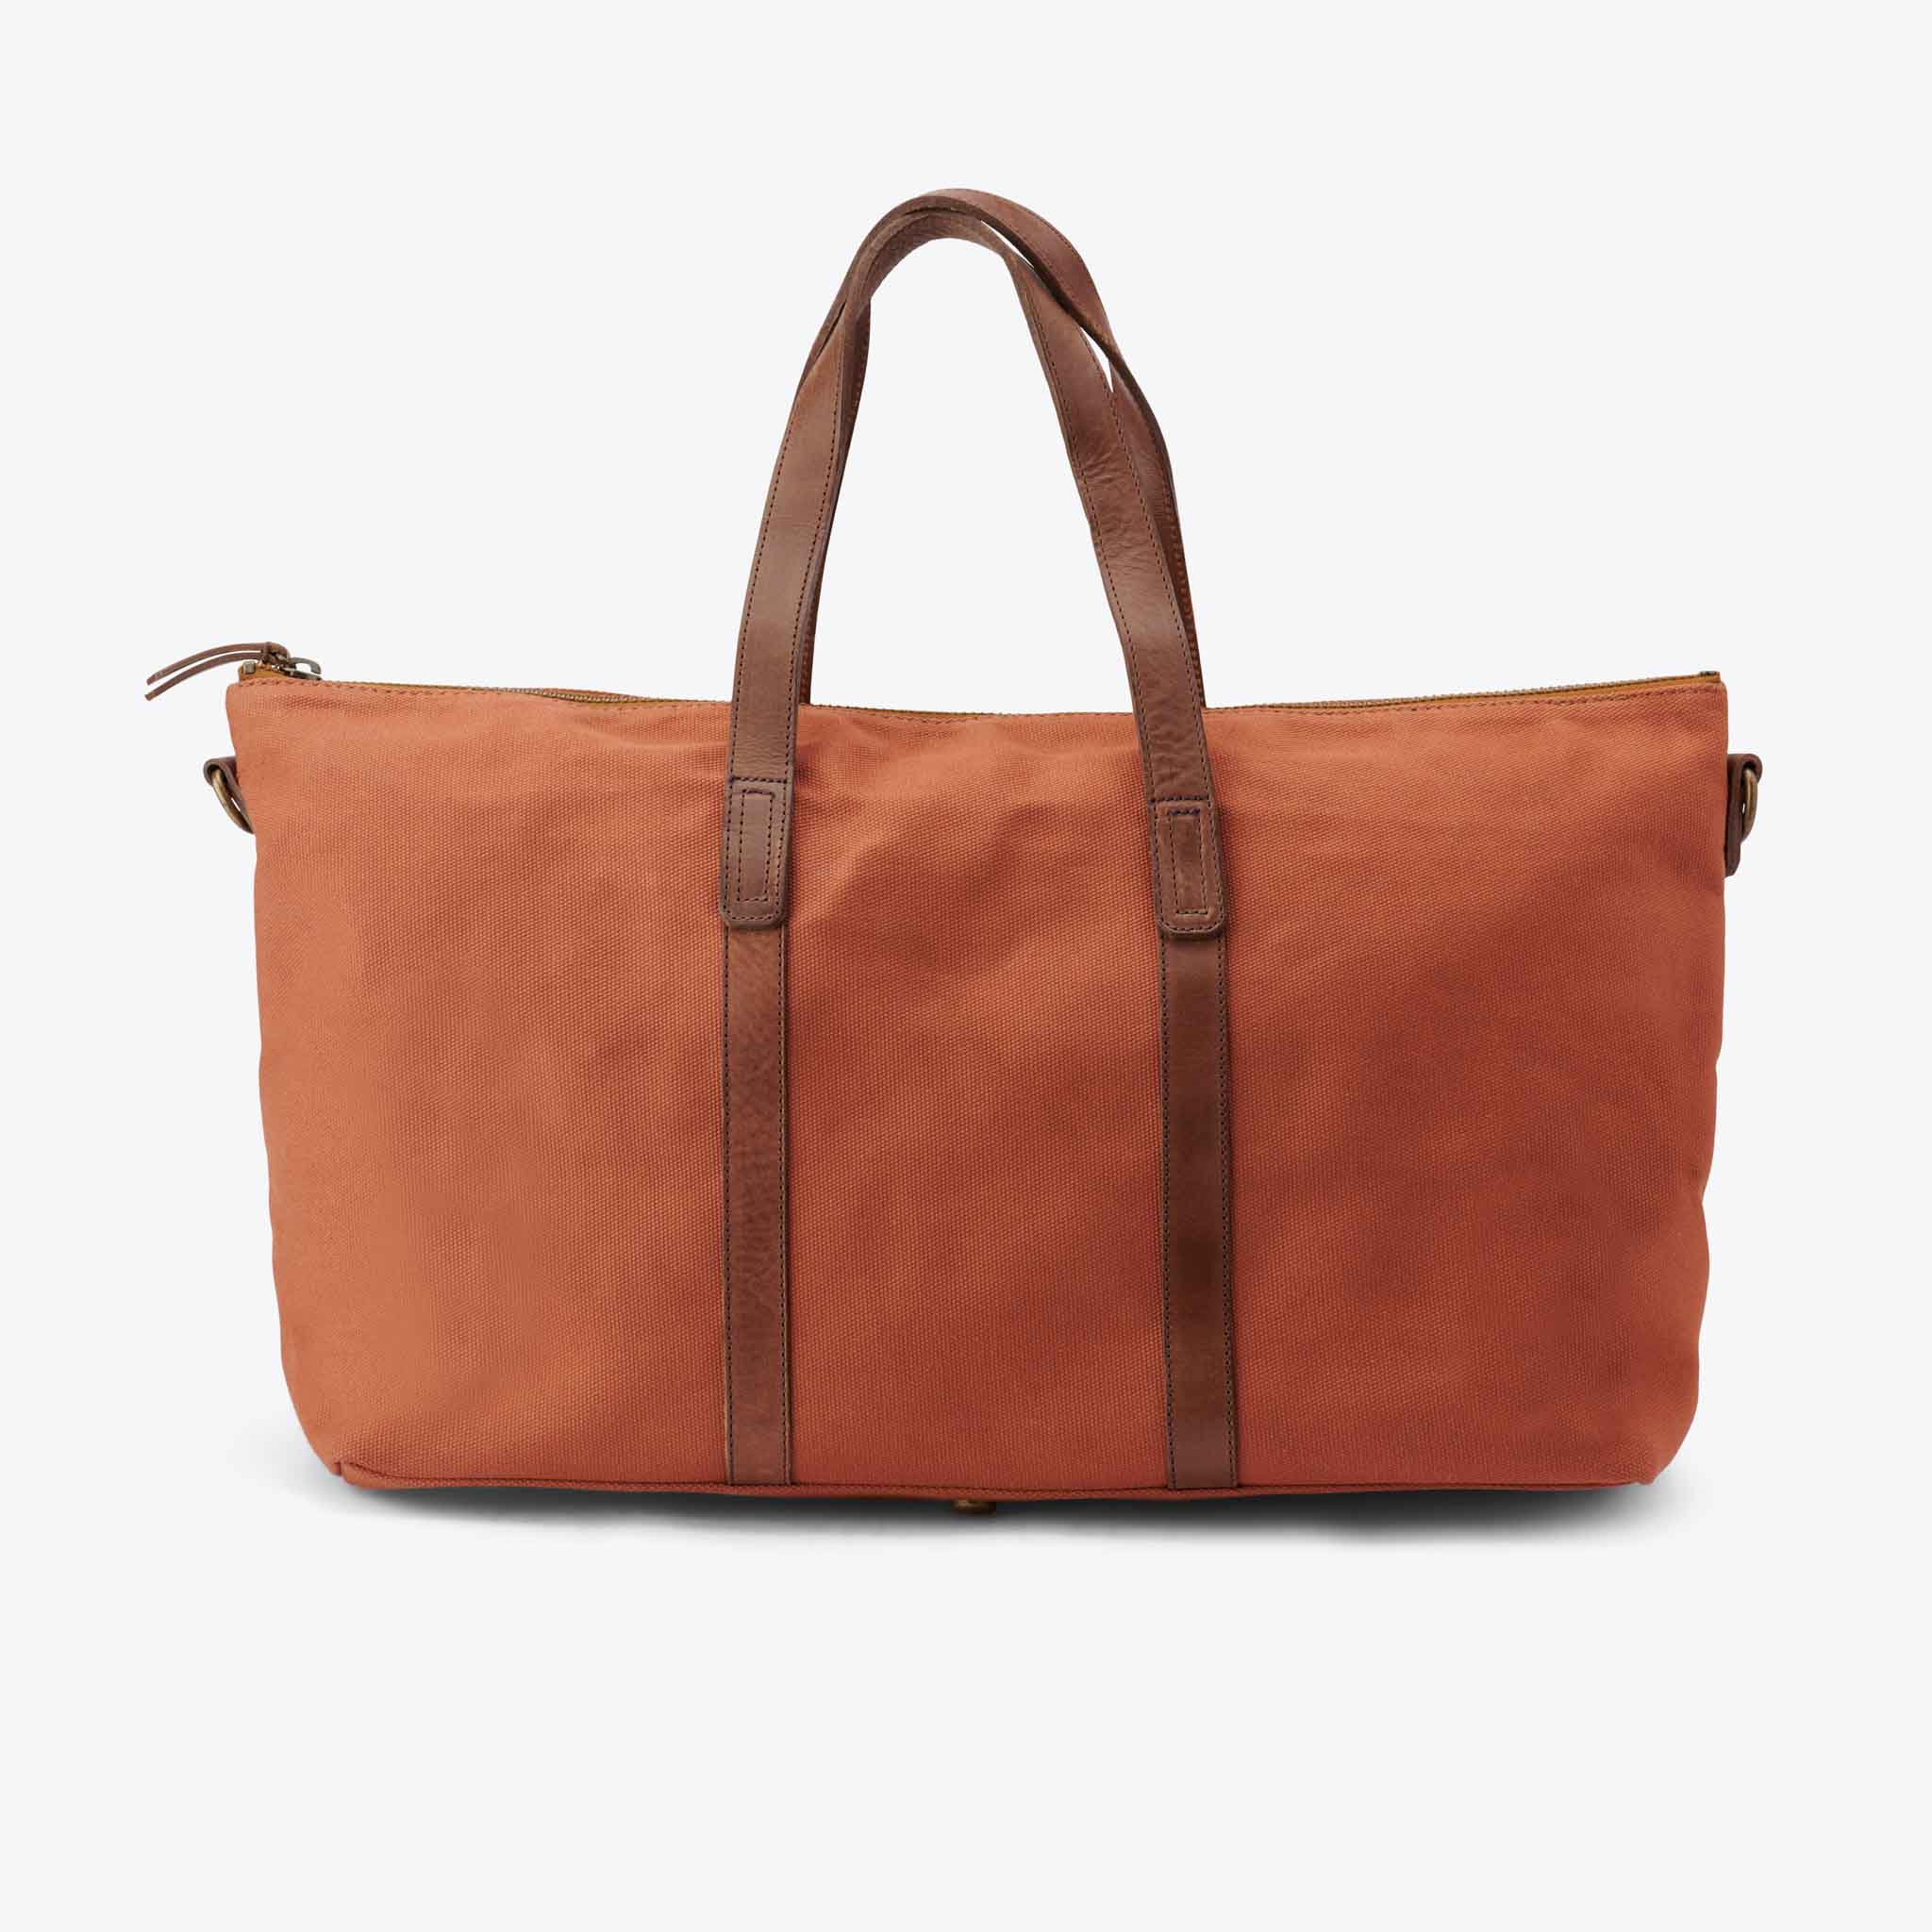 Product Image 3 of the Canvas Weekender Amber